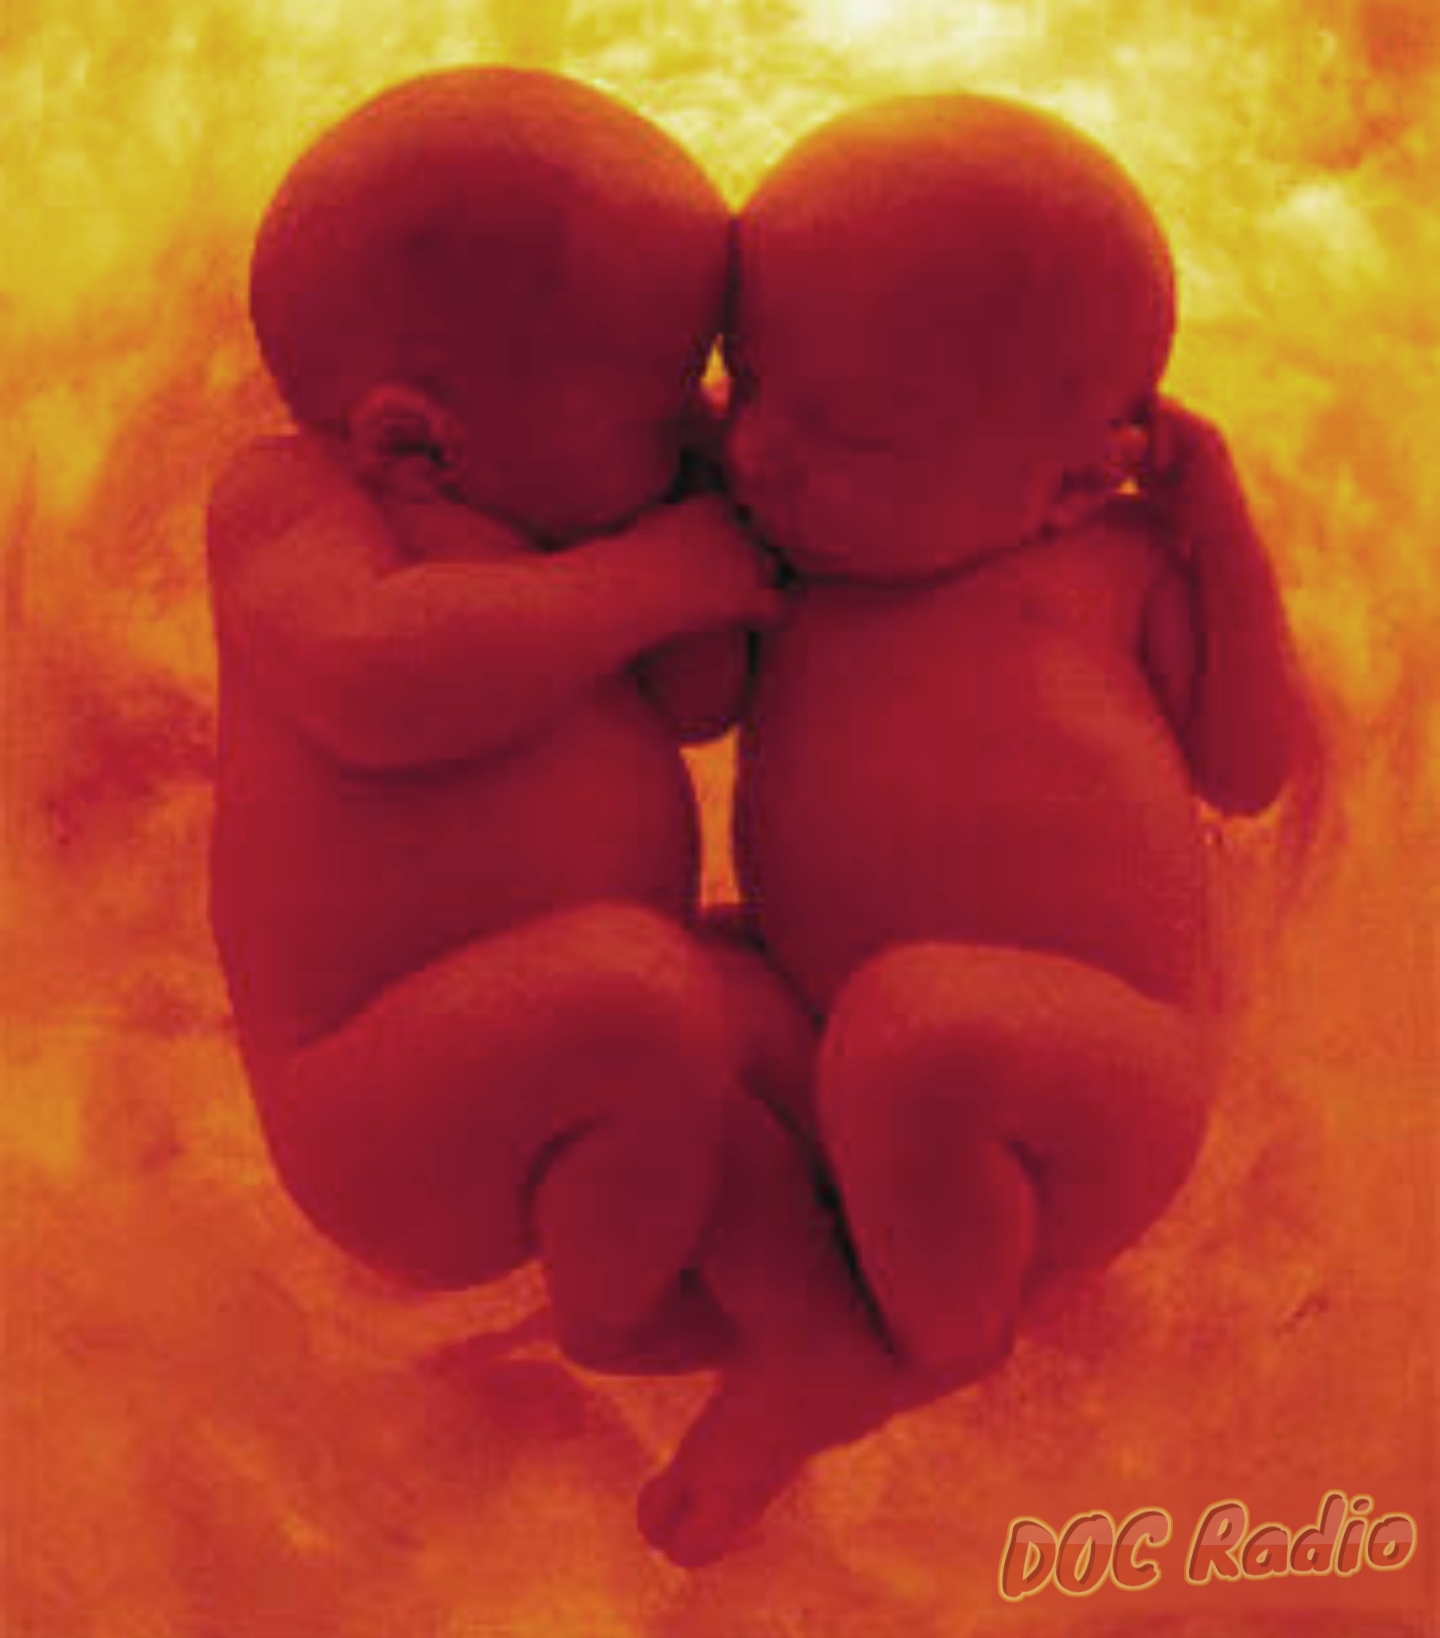 Two twins talk in womb of life after delivery in a parable about faith in God.